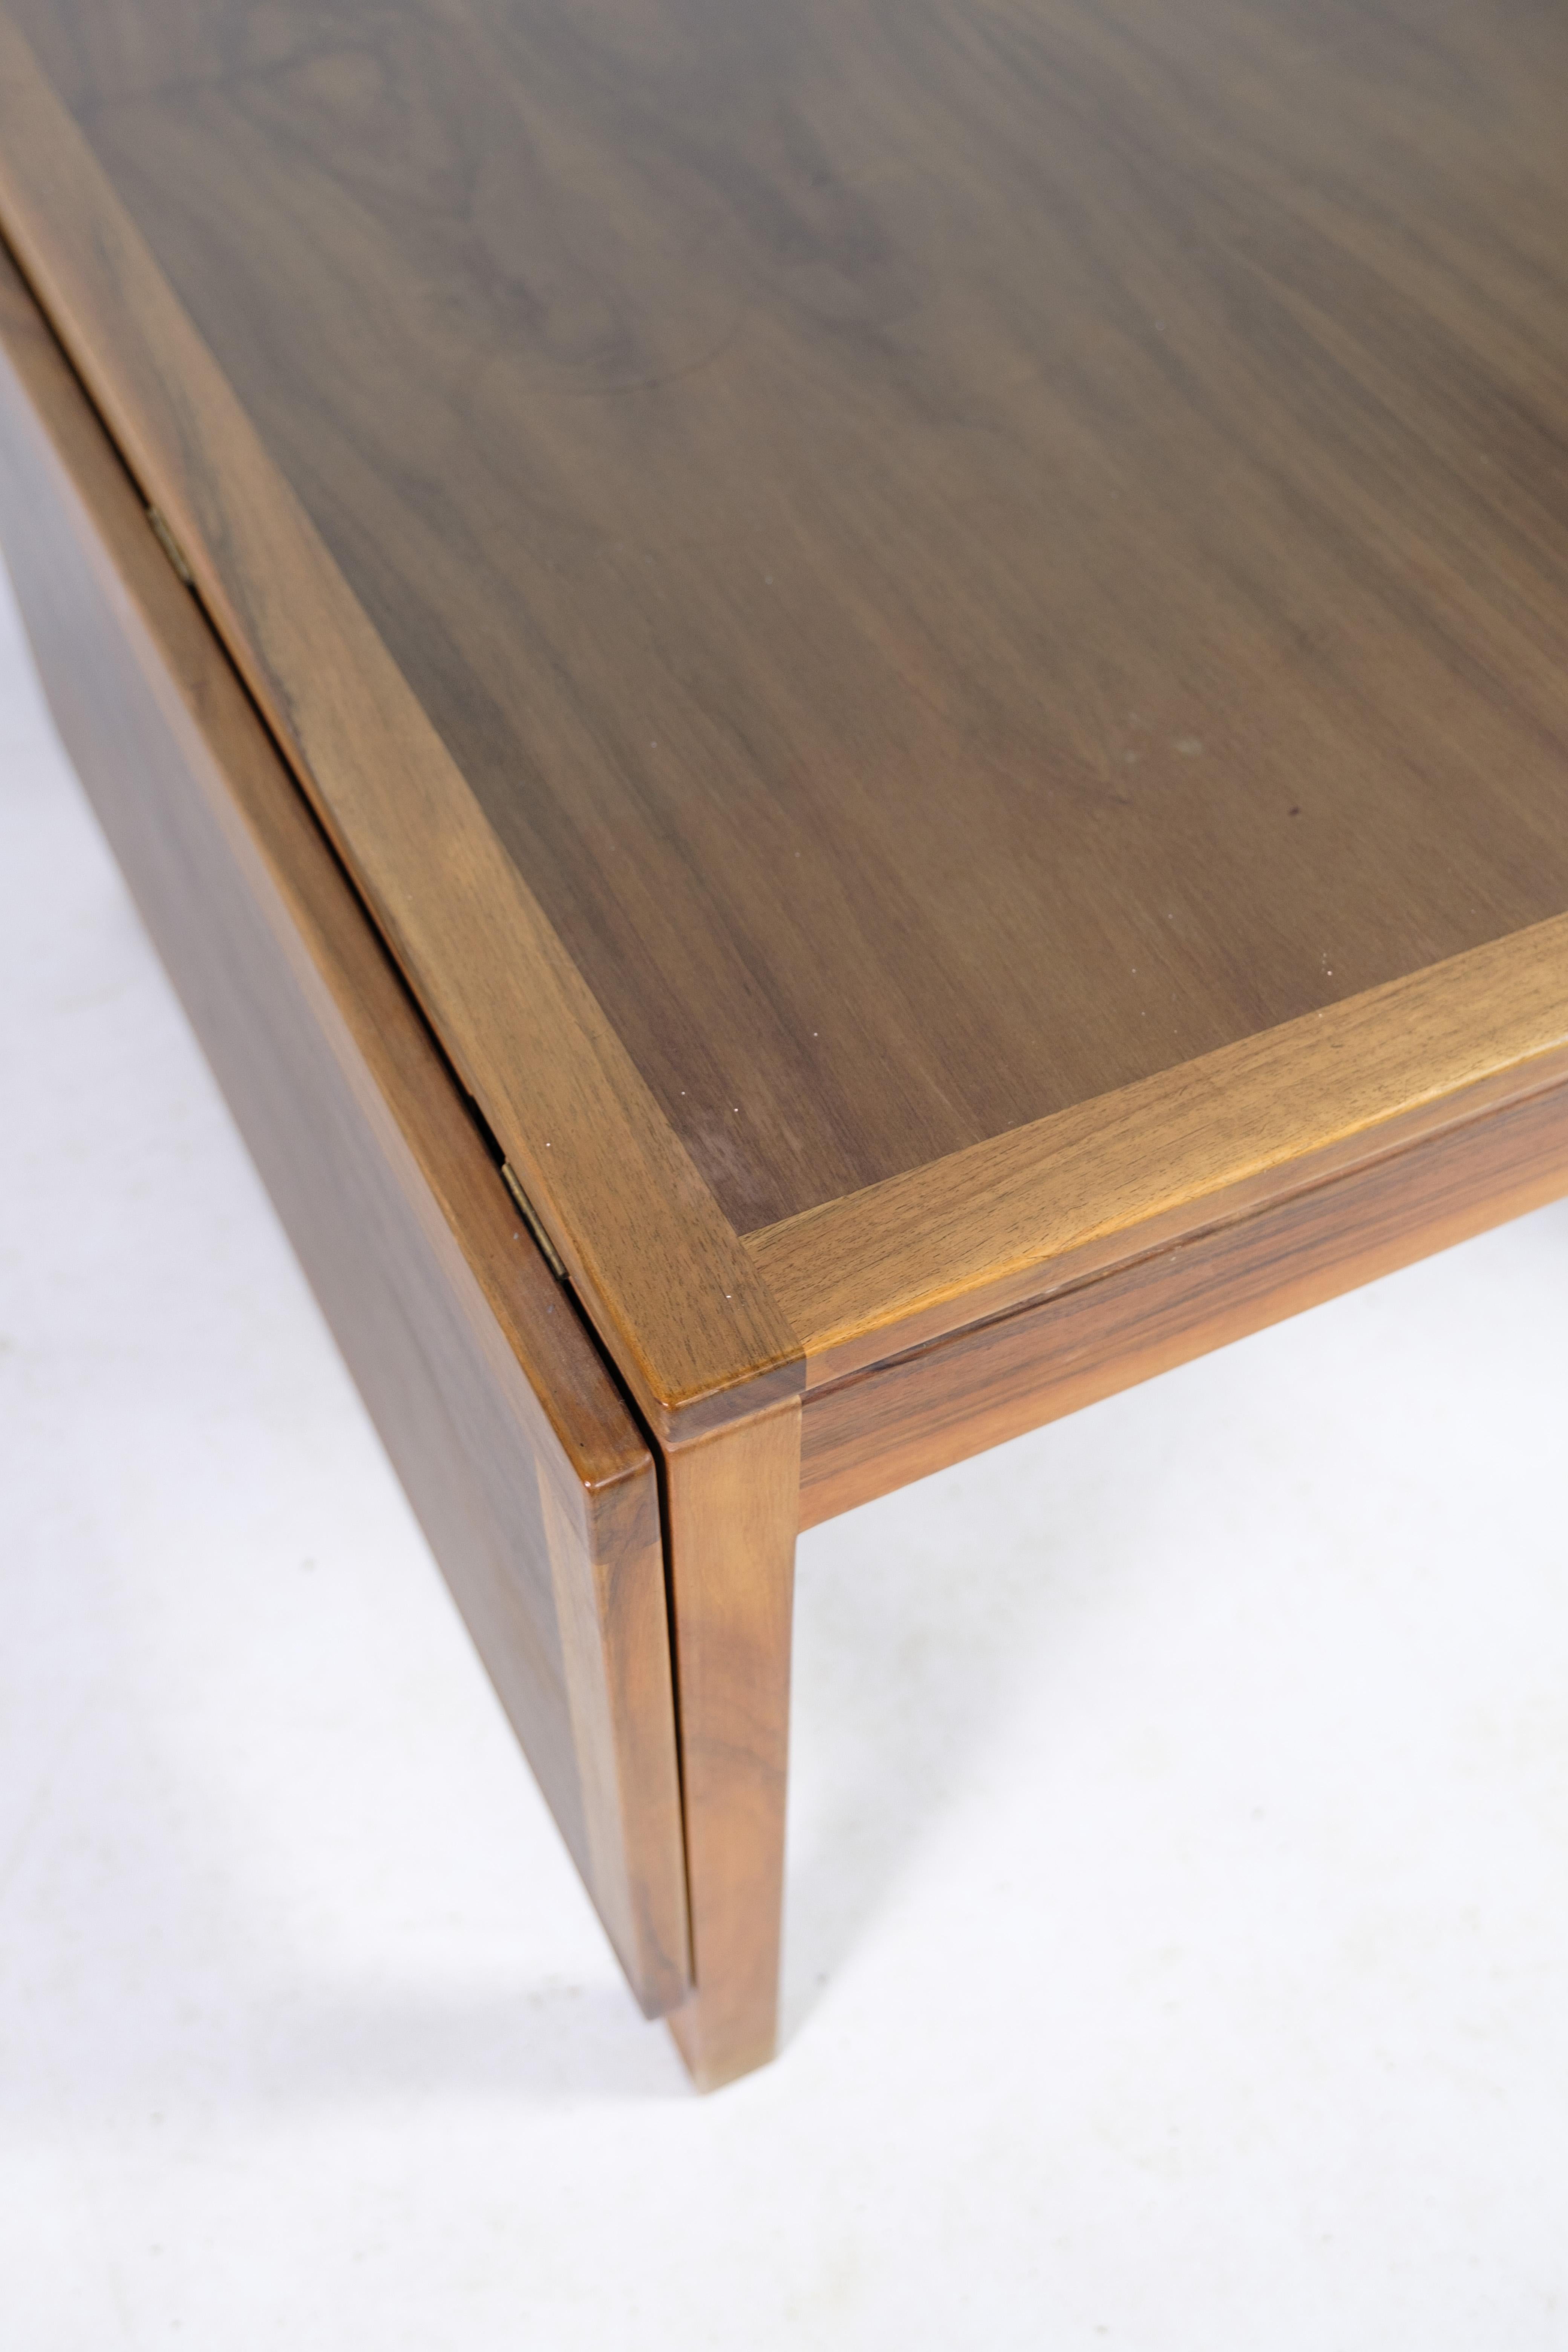 Danish Coffee Table, Model 5362 By Børge Mogensen Made By Fredericia Furniture 1960s For Sale